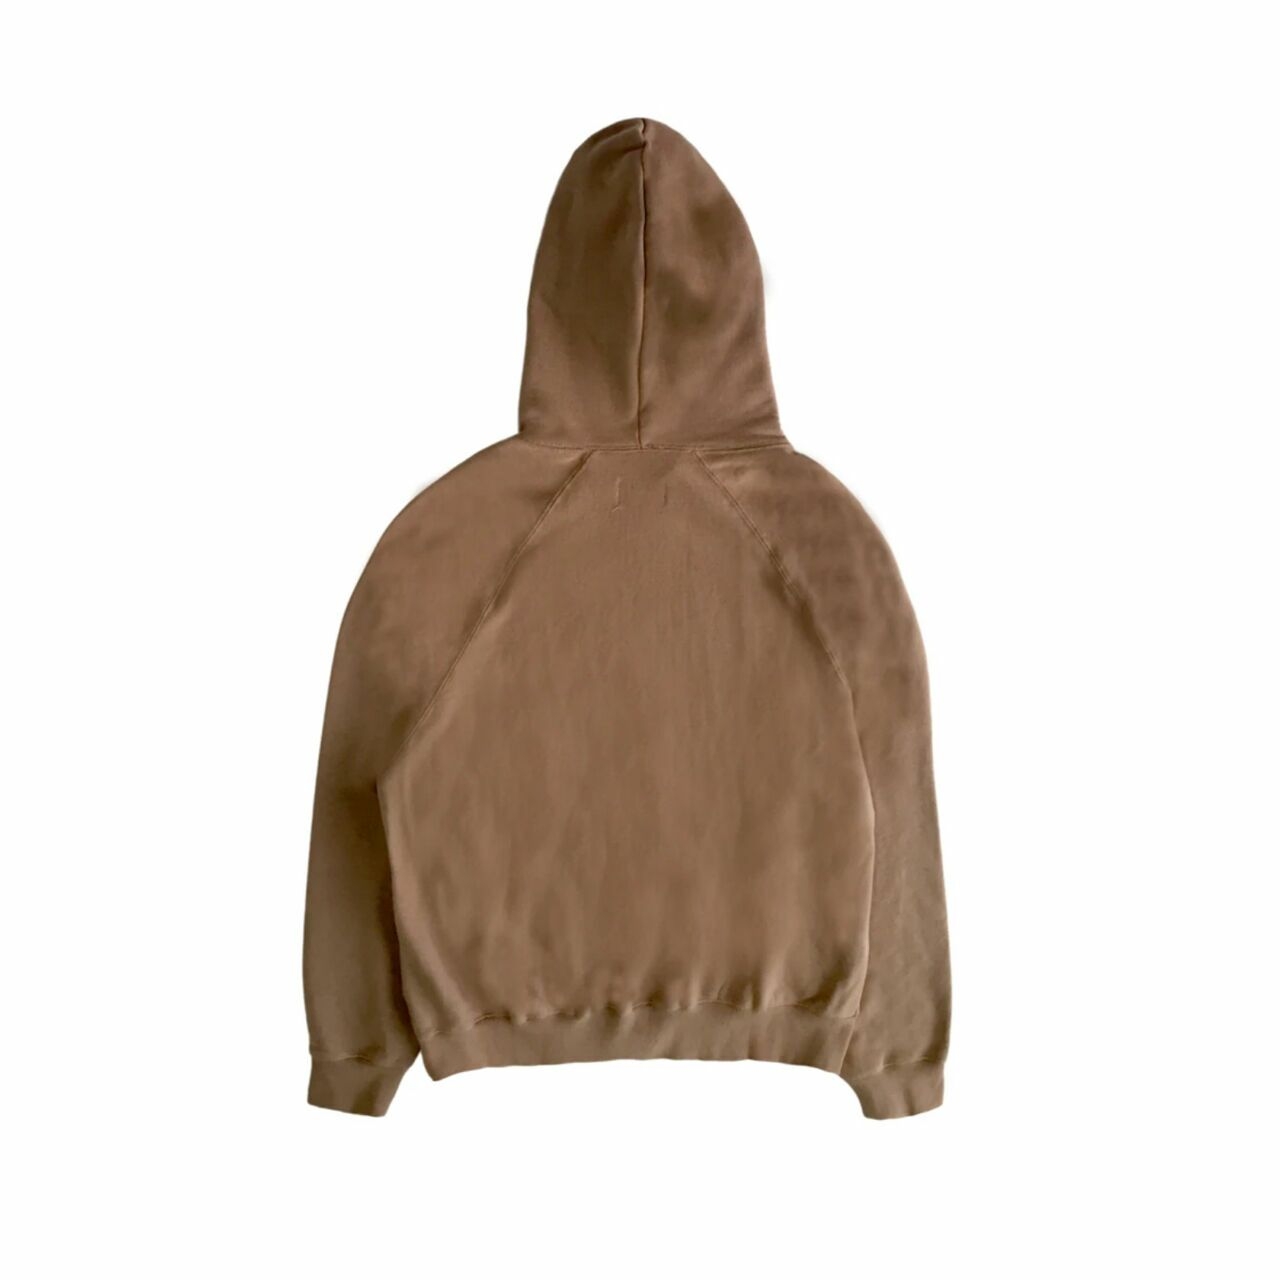 Fear Of God x Pacsun Essentials Pullover Hoodie Stucco Sweater